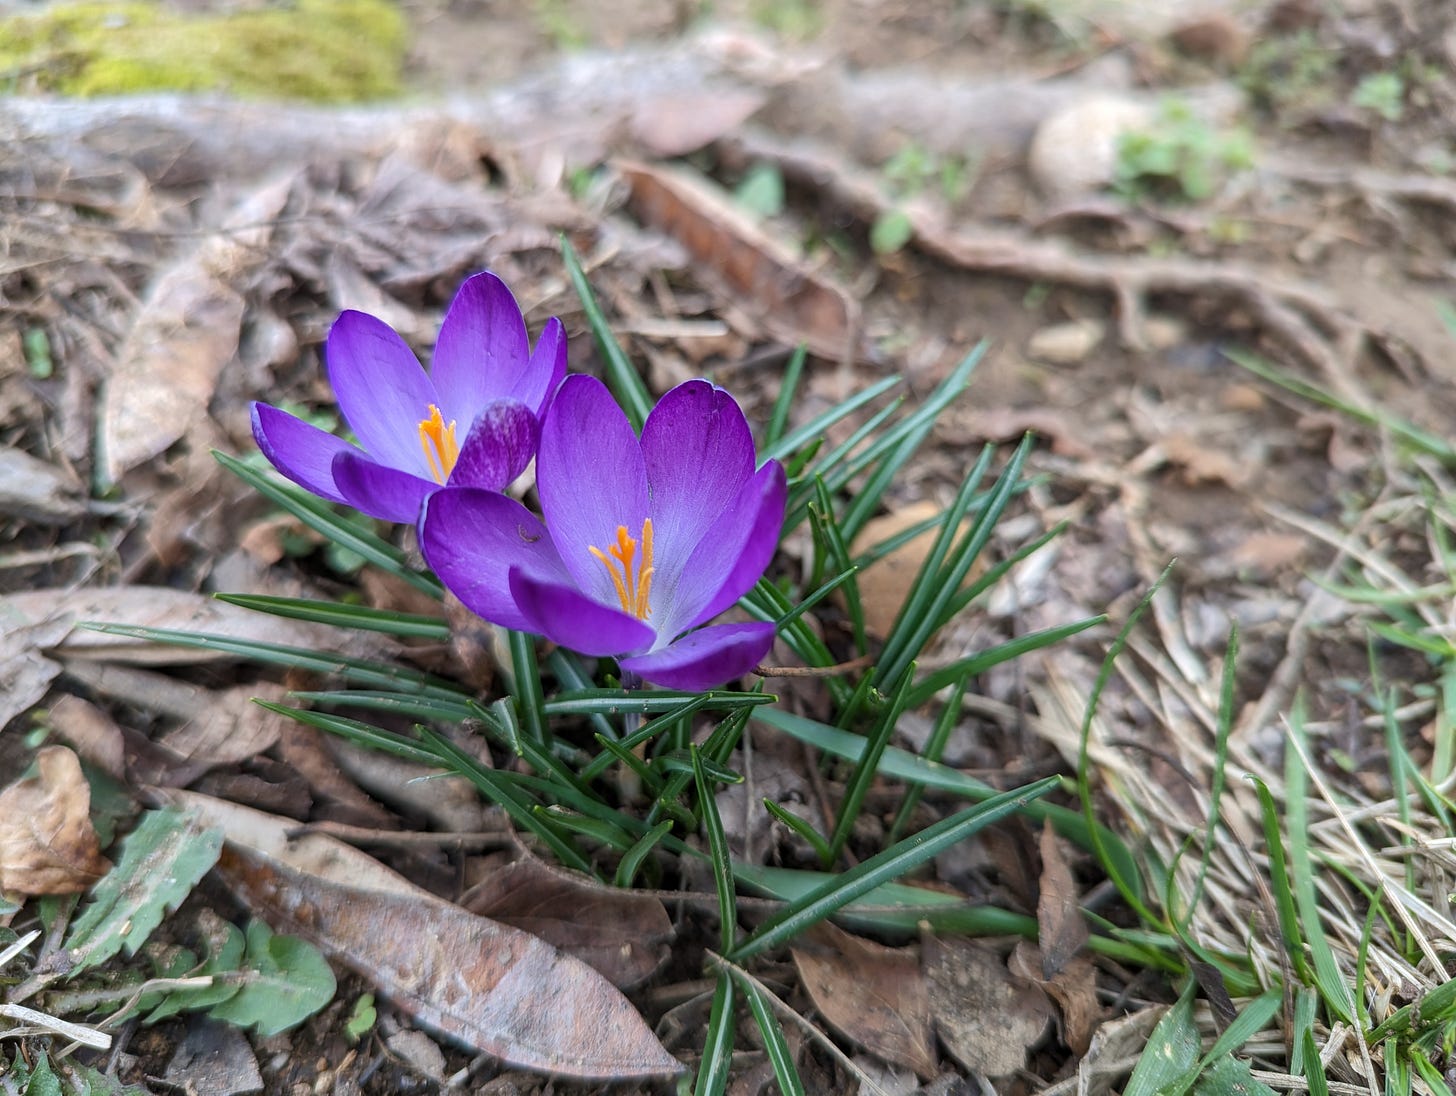 Two purple spring crocuses peek up among grass and dead leaves.